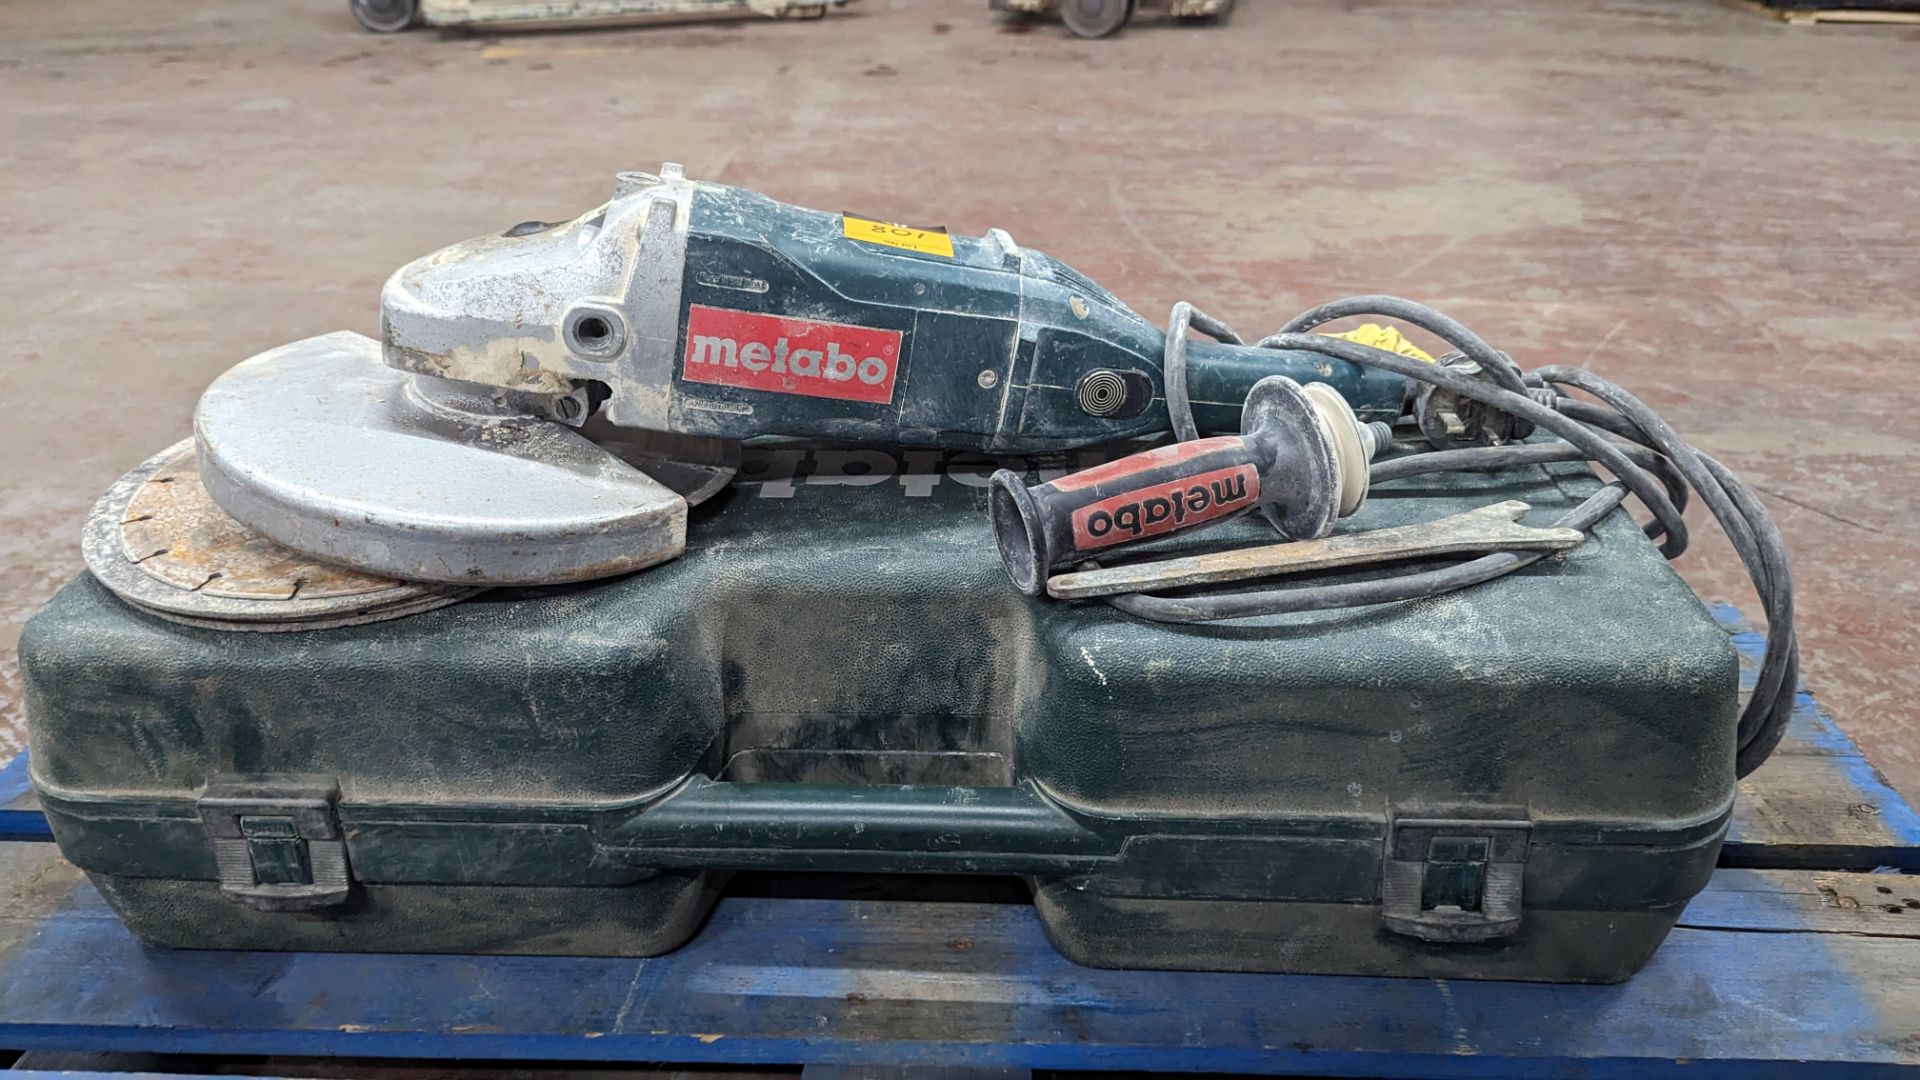 Metabo large heavy duty angle grinder in case - Image 5 of 5